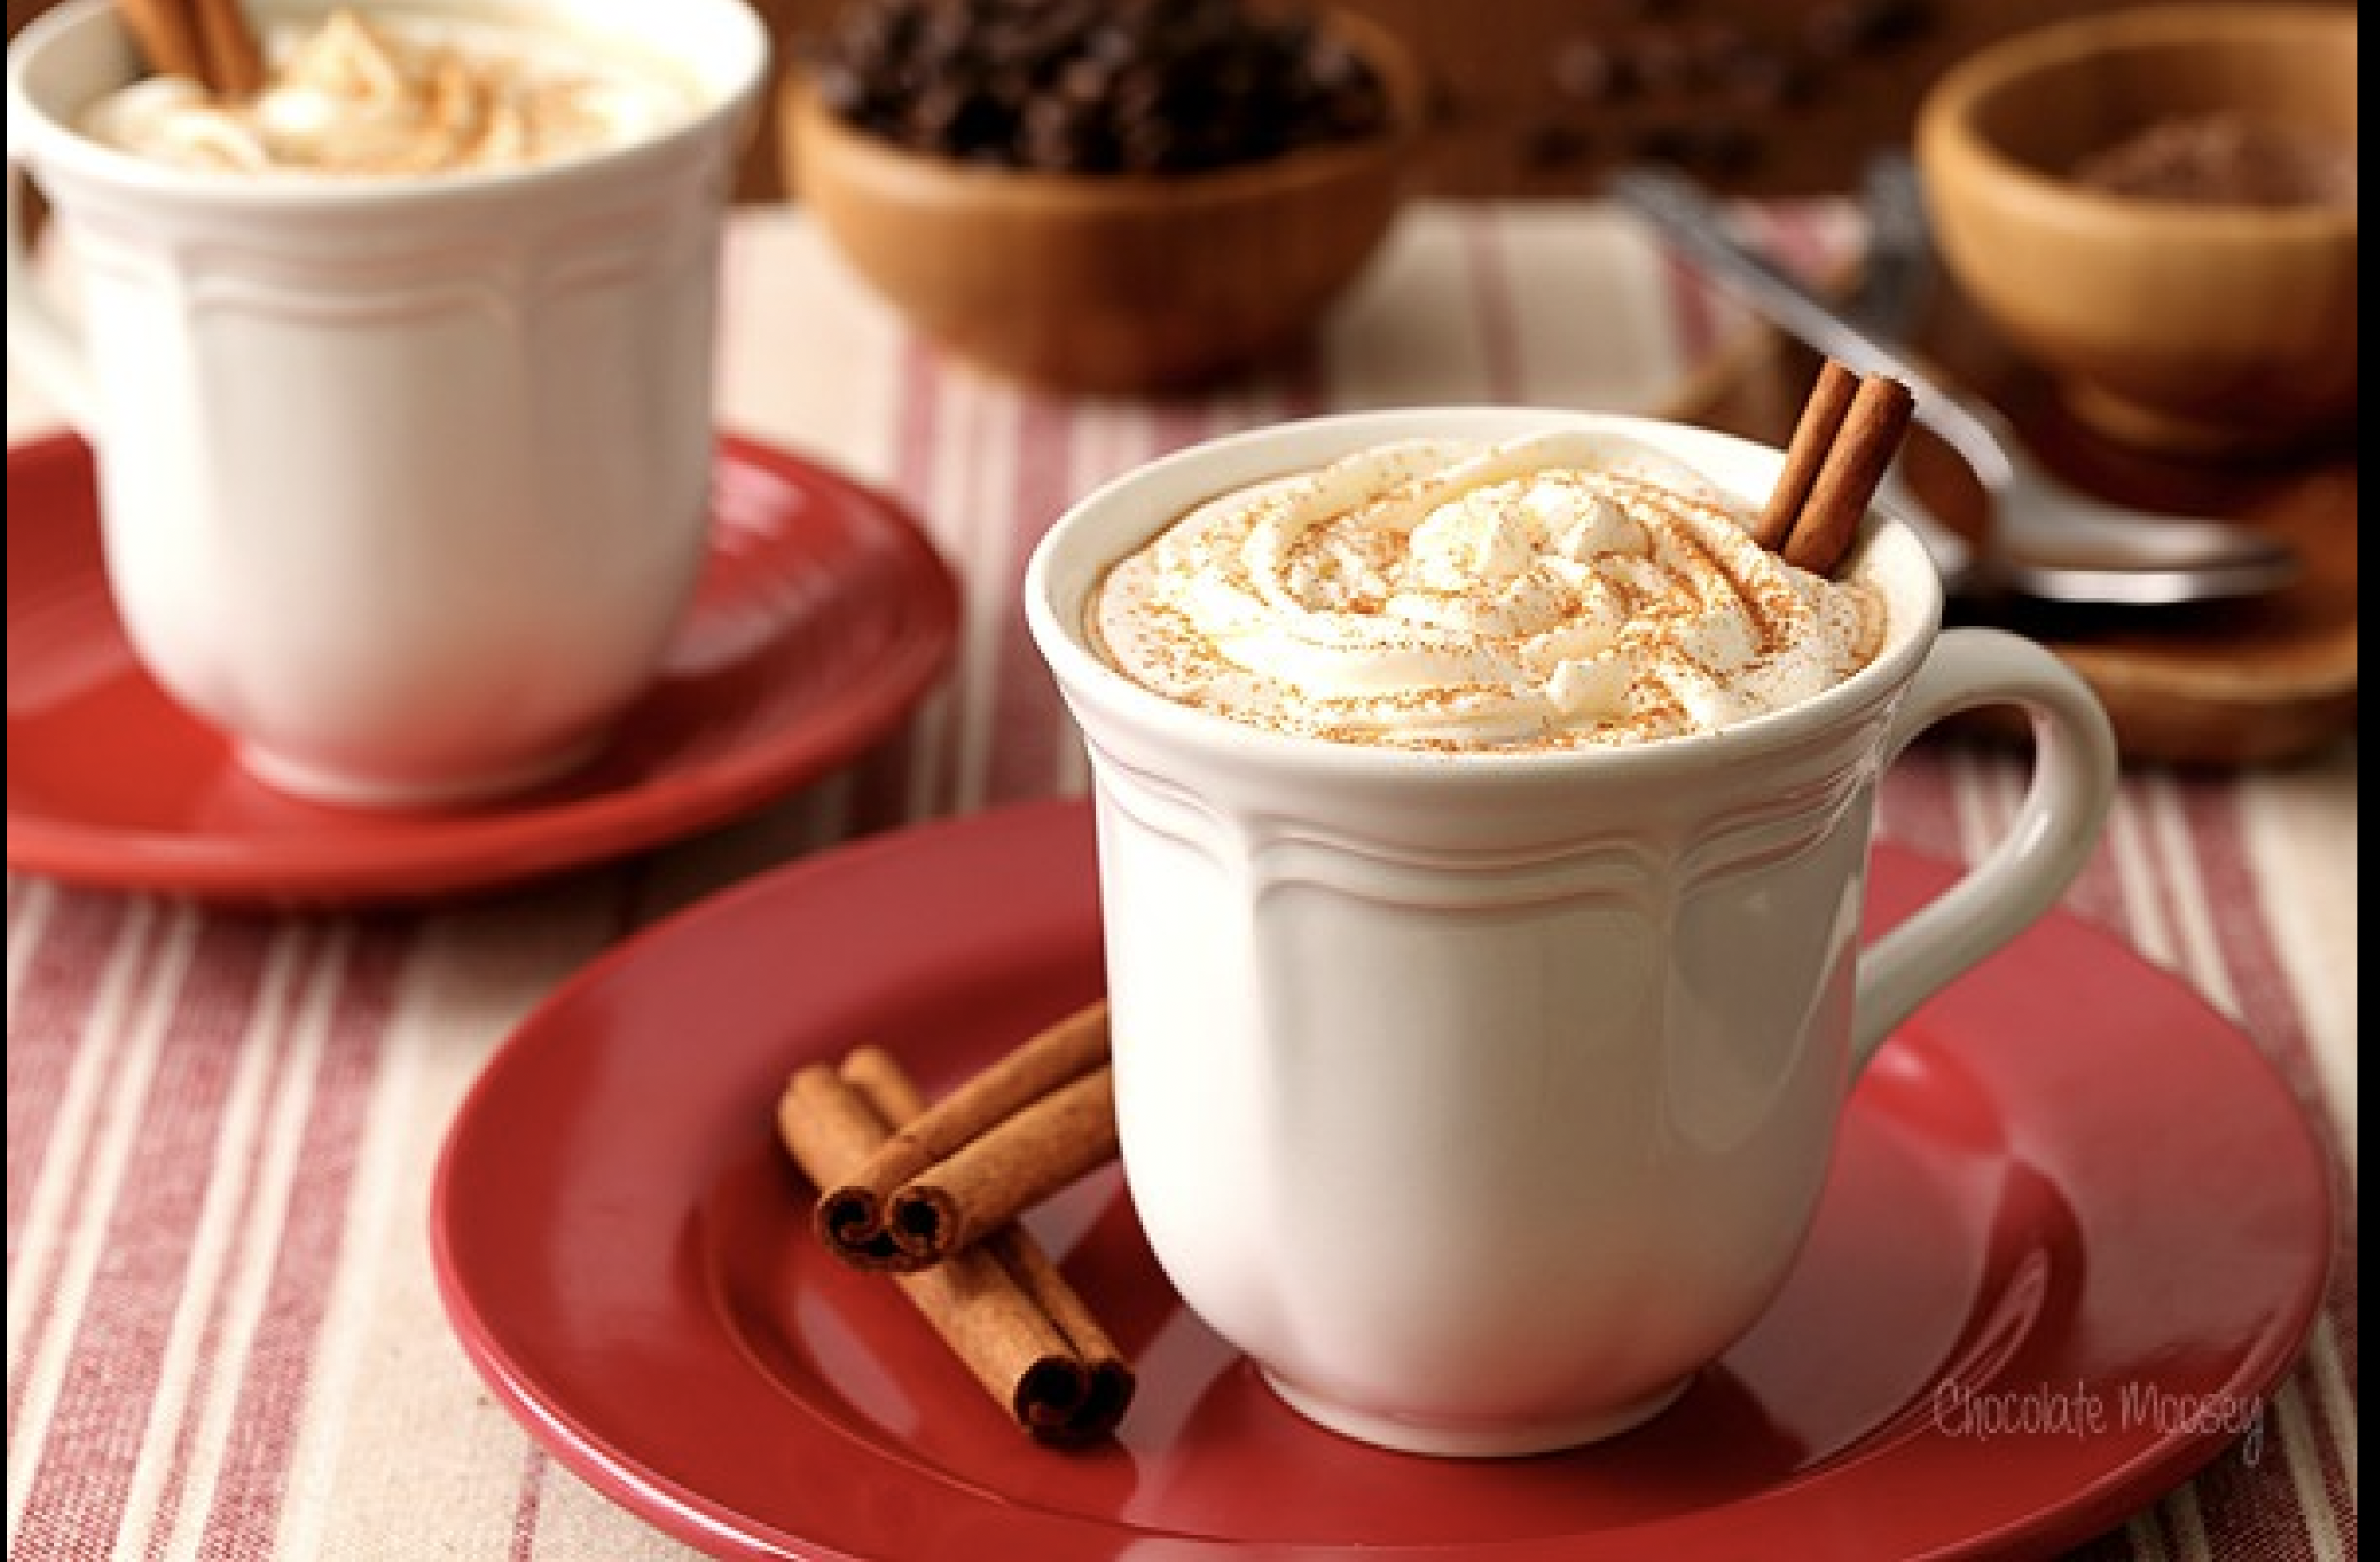 <p>Coffee meets hot chocolate in this Mexican Mocha recipe! The cinnamon and chili powder give your spicy coffee a nice kick to wake you up when you need it the most.</p><p><b><a href="https://www.chocolatemoosey.com/mexican-spiced-mocha/">Get recipe</a></b></p>